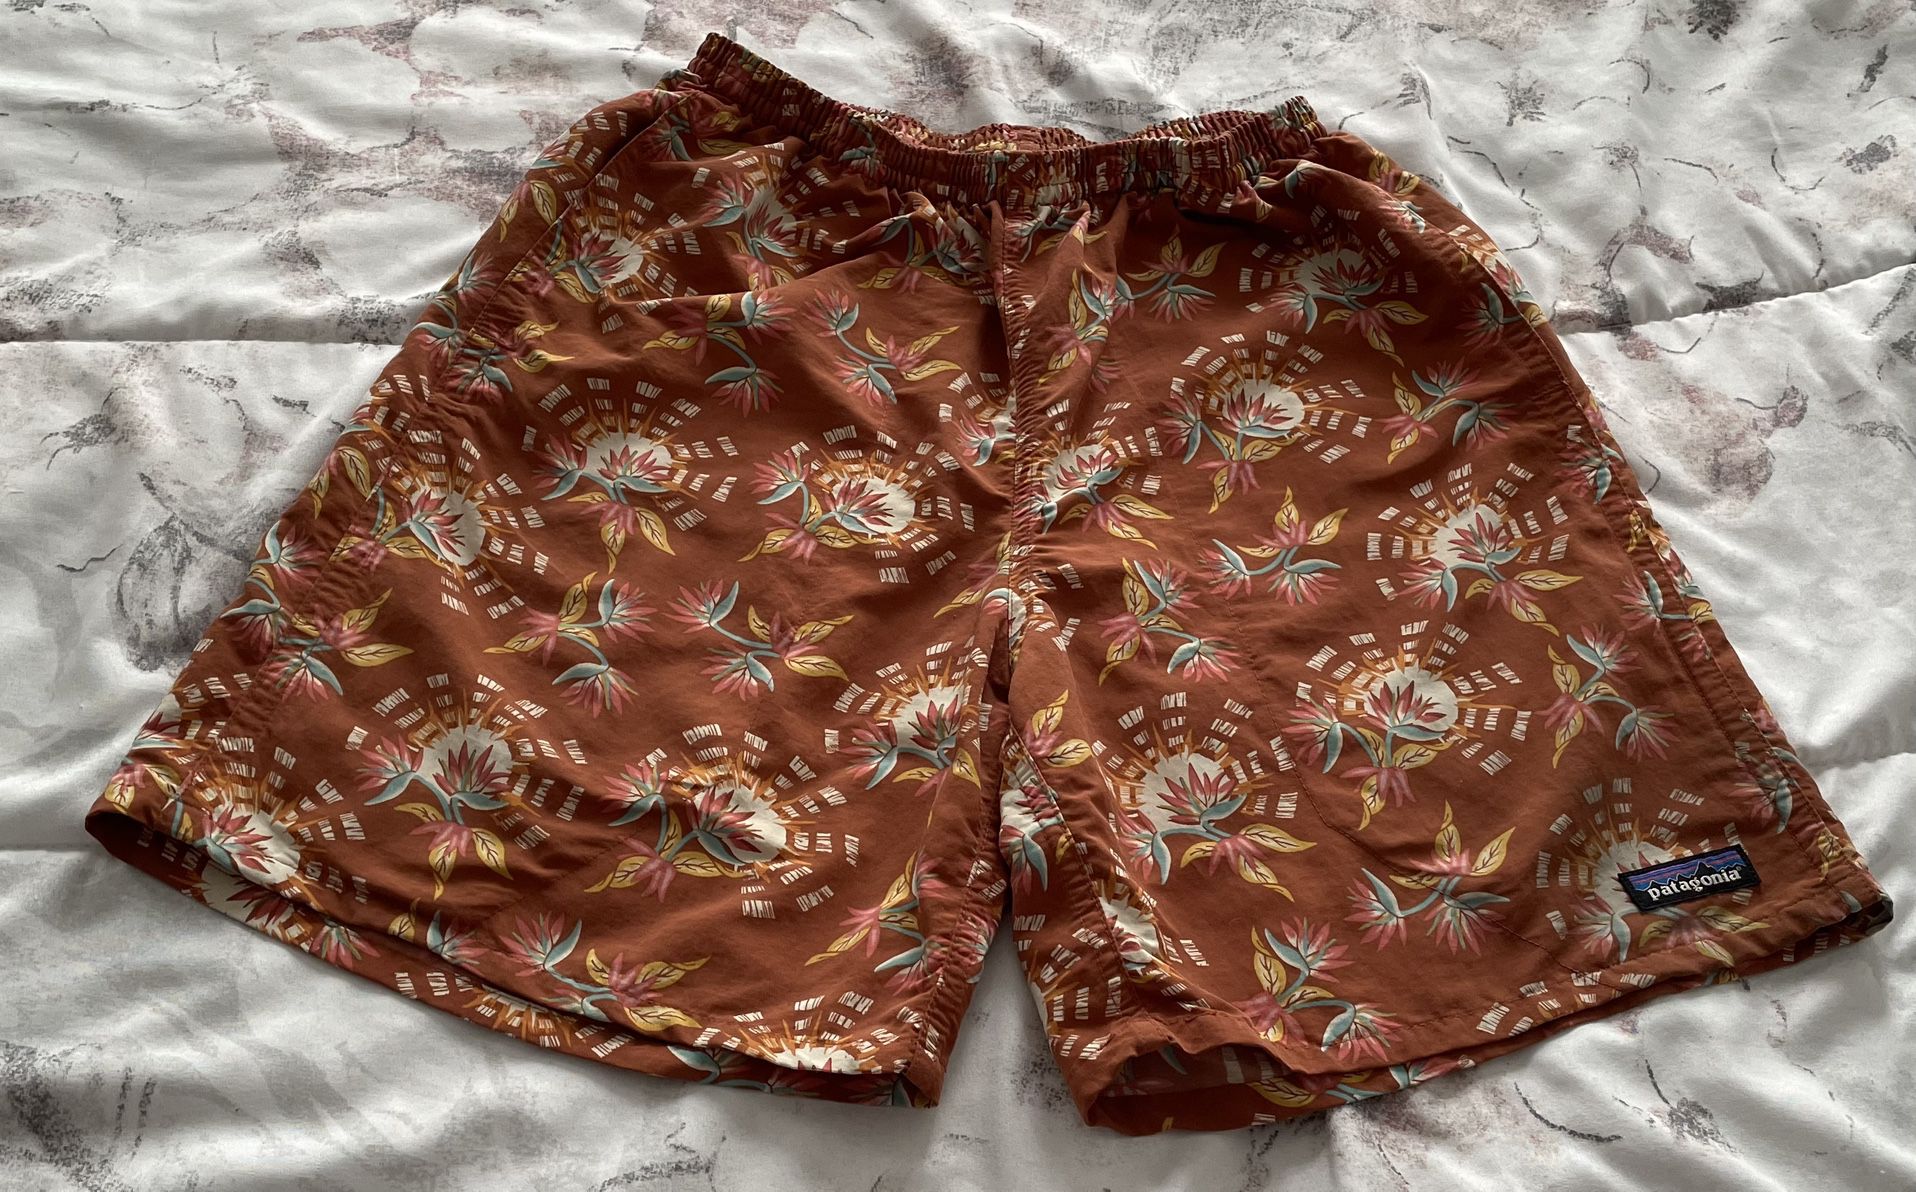 Patagonia Men’s Brown Floral Leaves Adjustable Waist Swim Trunks Board Shorts with Pockets, size S 